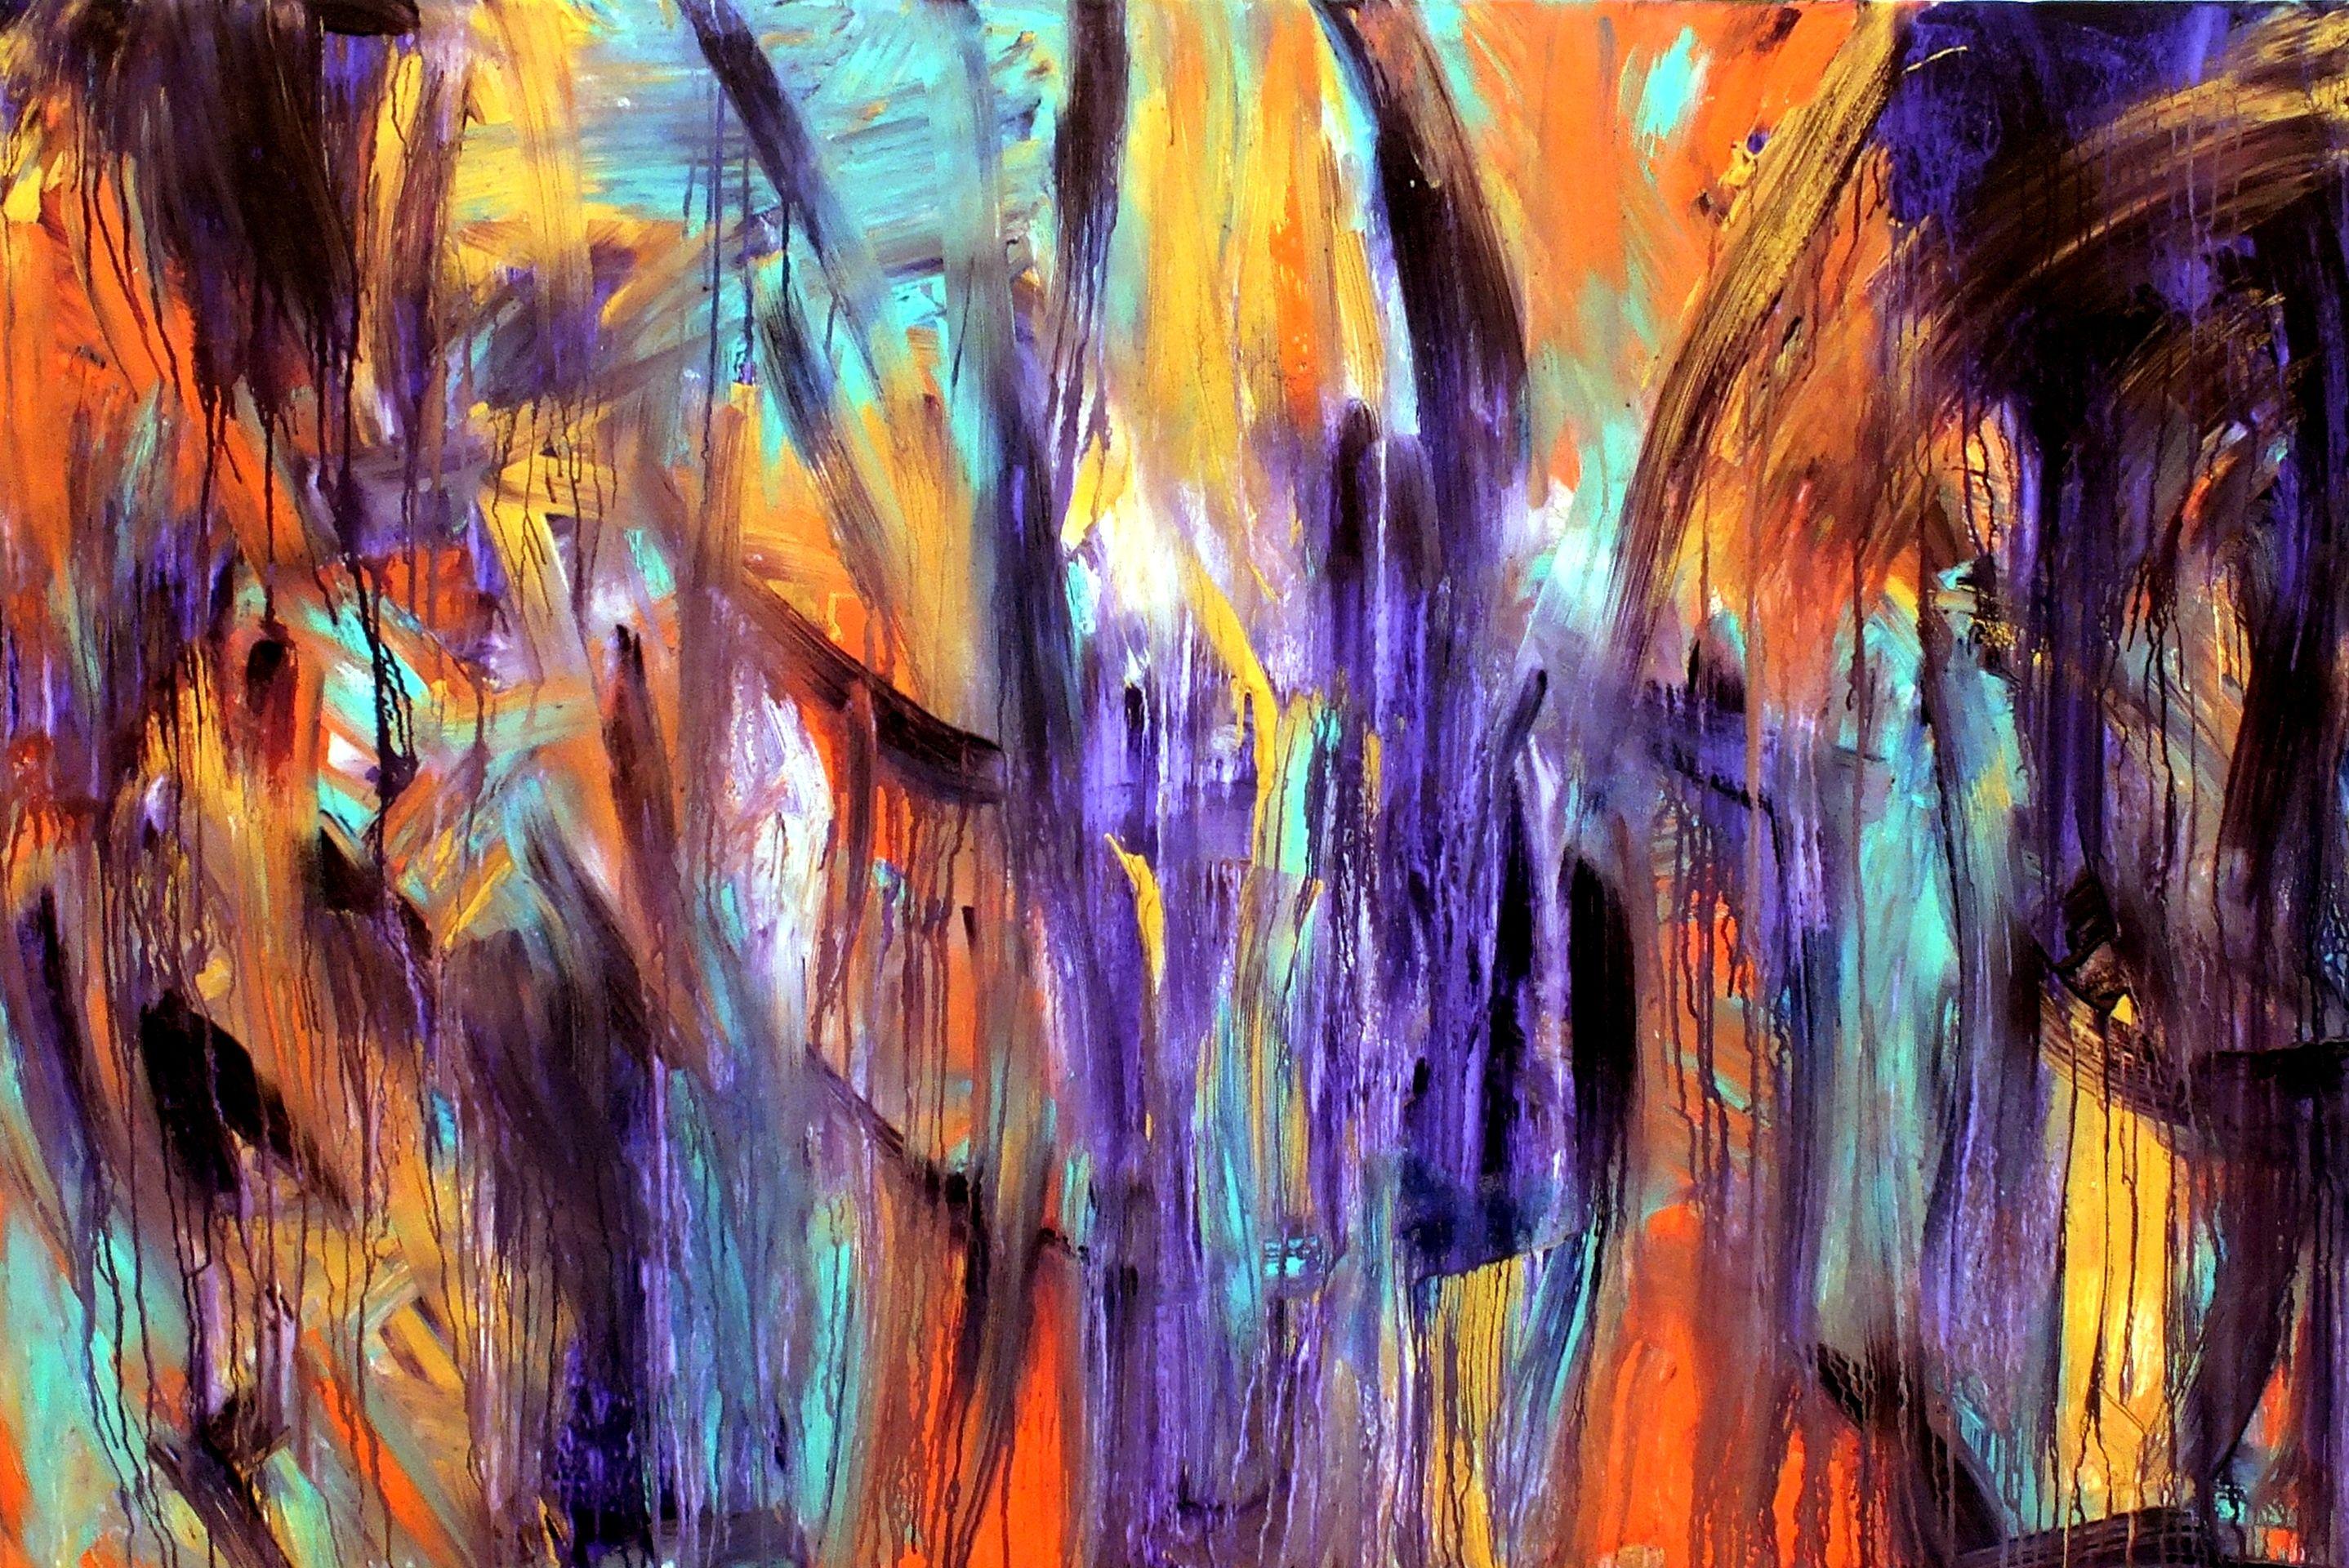 Carla Sá Fernandes Abstract Painting - The Emotional Creation #75, Painting, Acrylic on Canvas